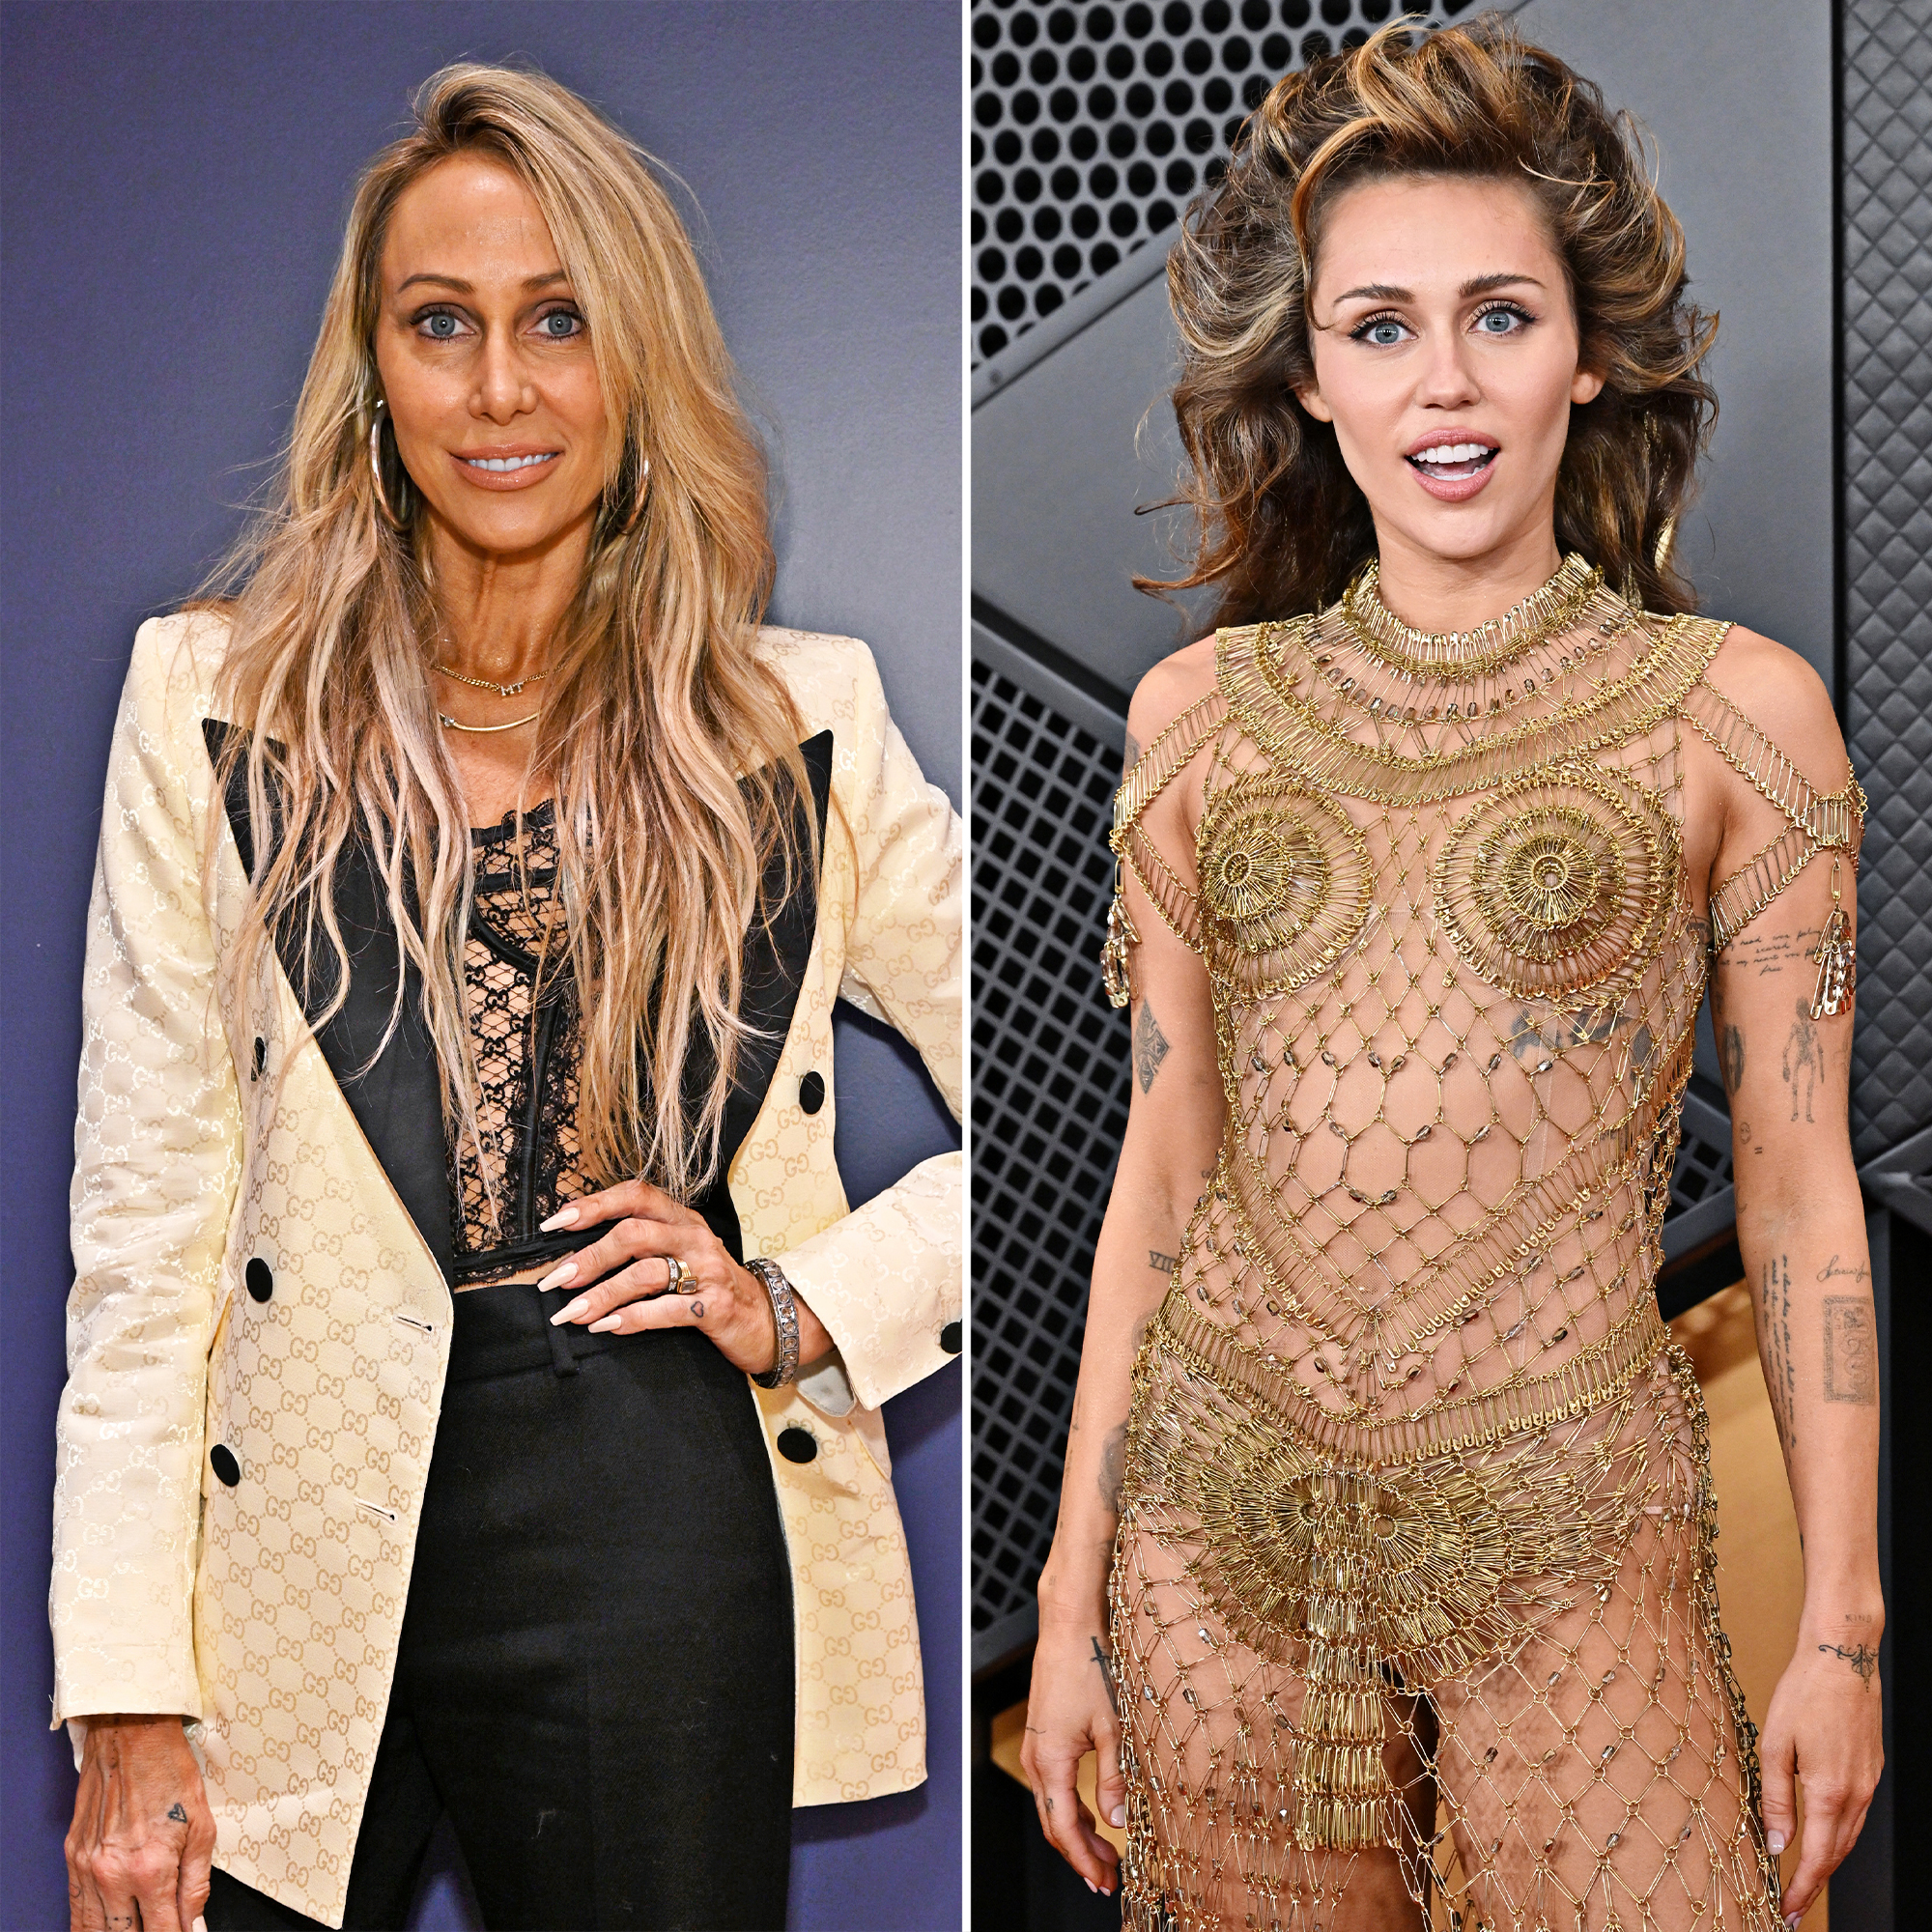 Tish Cyrus Is 'Glad' Miley Cyrus Told Grammys Crowd to Dance | Us Weekly